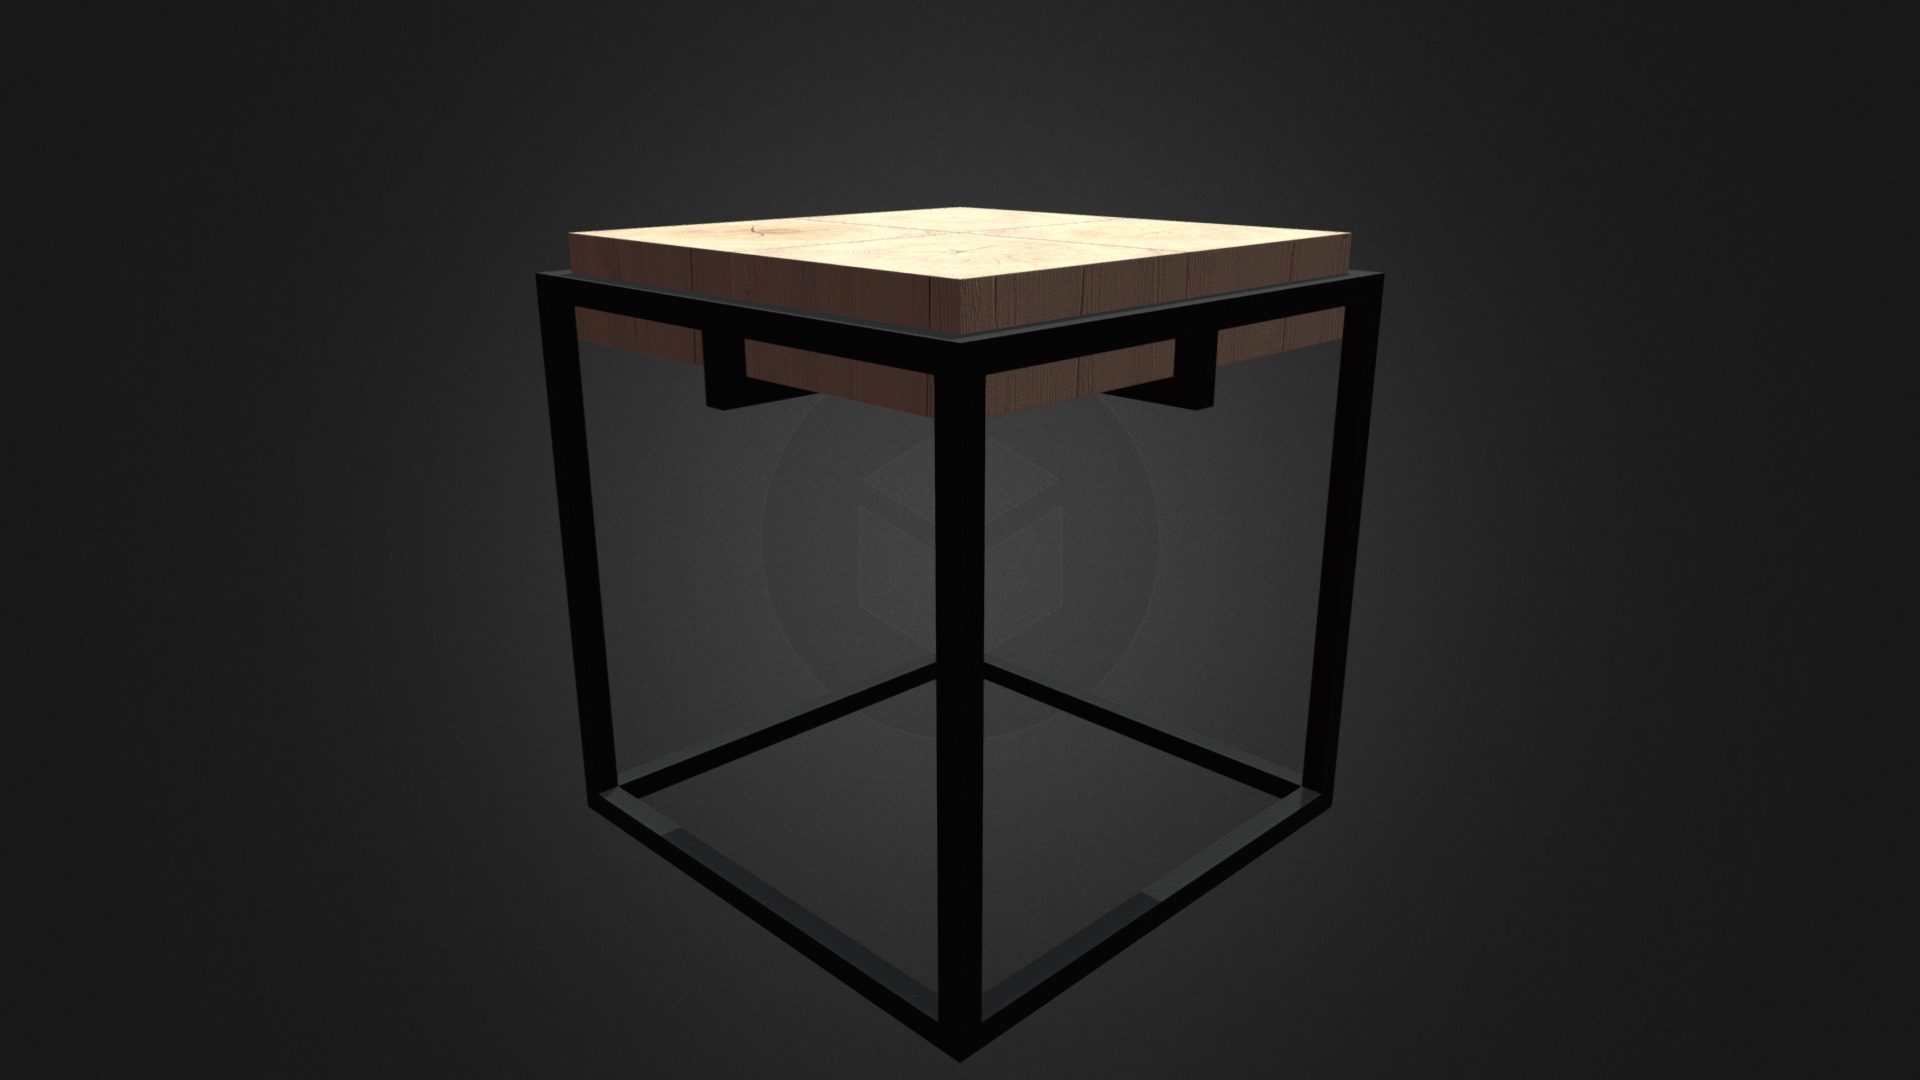 3D model Wood and Metal Square Coffee Table D Model - This is a 3D model of the Wood and Metal Square Coffee Table D Model. The 3D model is about a table with a glass top.